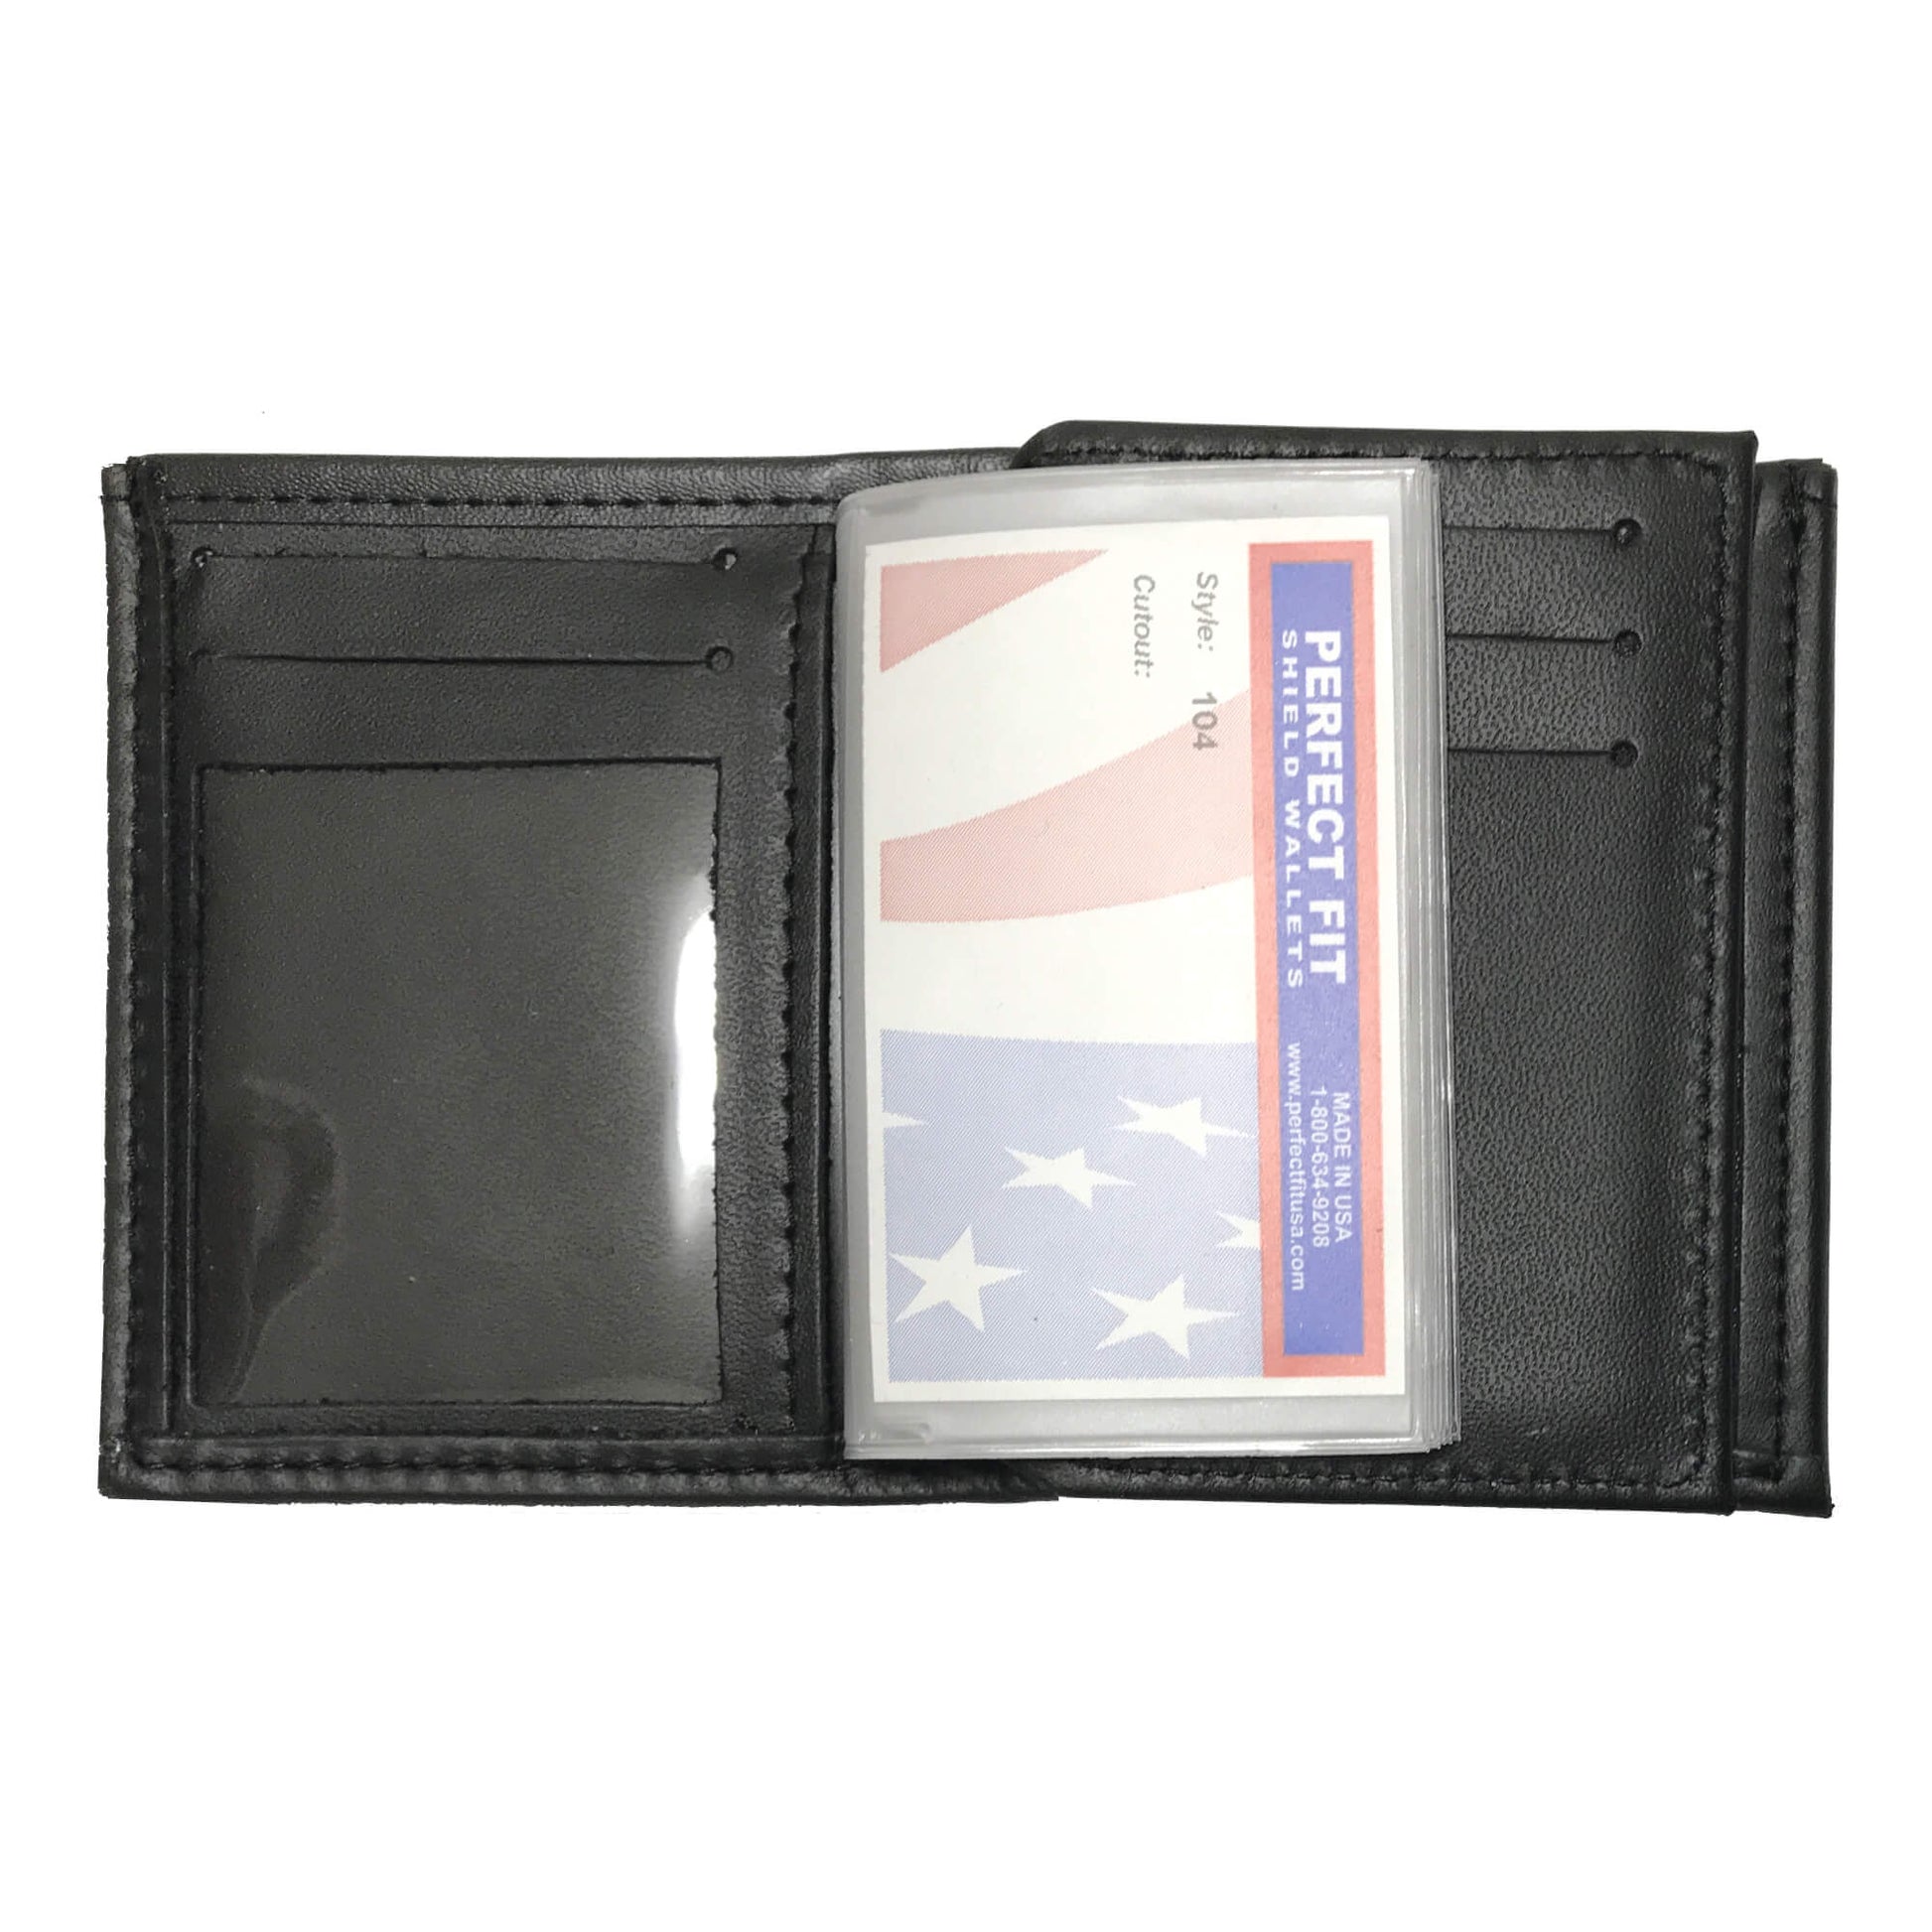 New York Police Department (NYPD) Officer Bifold Hidden Badge Wallet-Perfect Fit-911 Duty Gear USA